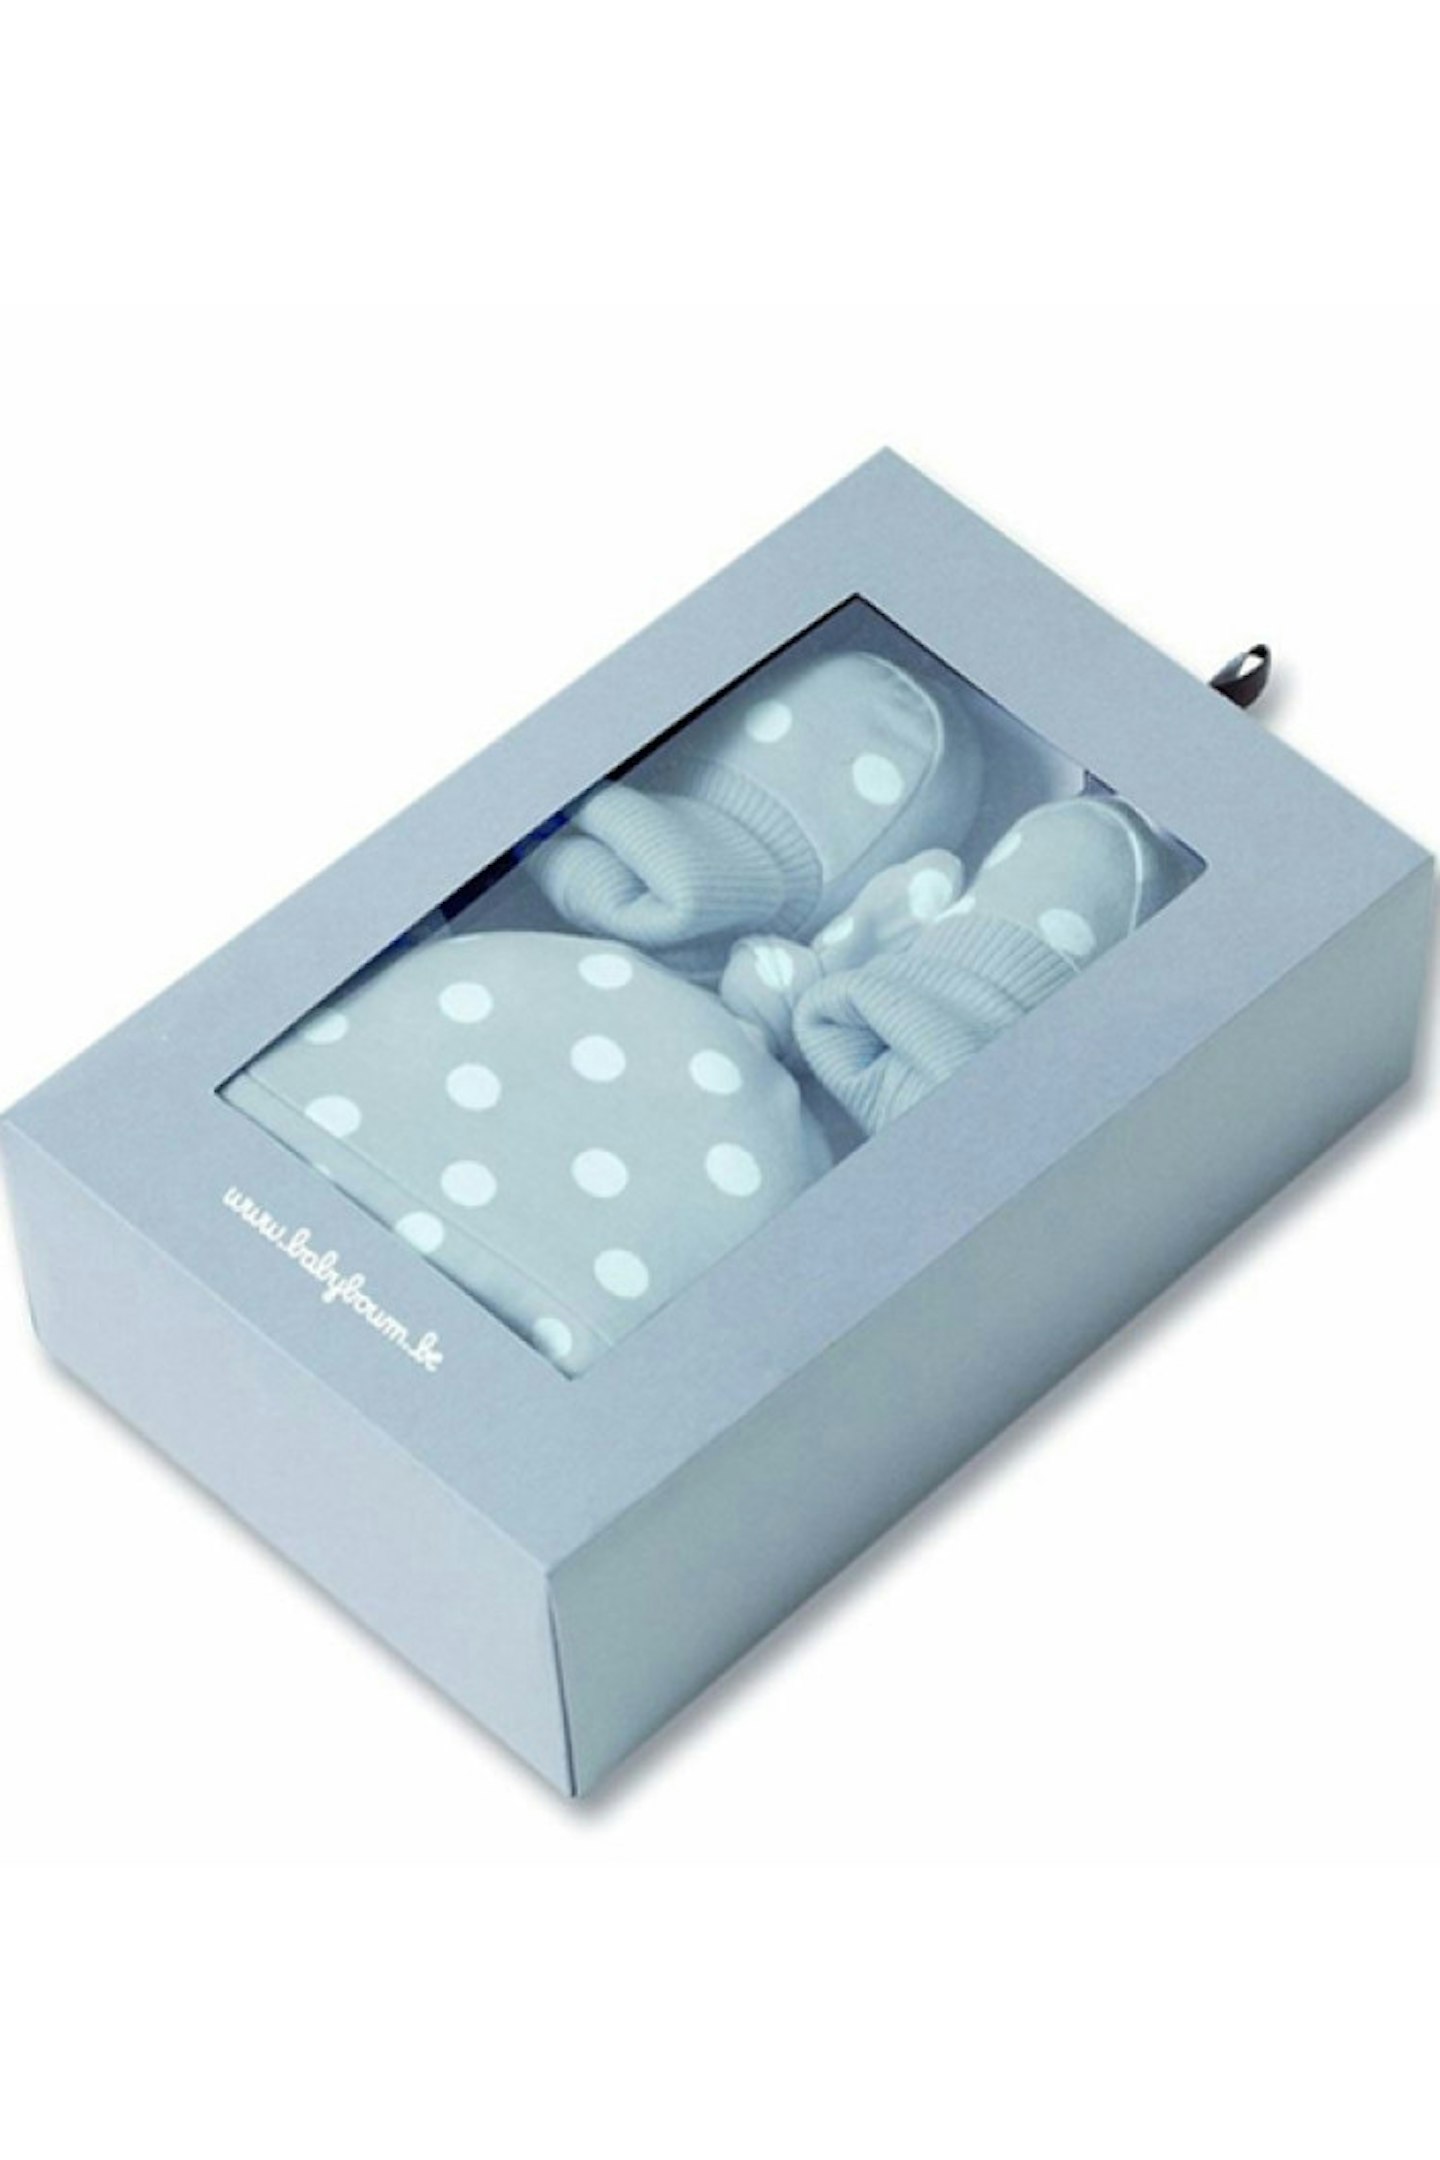 8. Baby Boum Youmi Misty/Candy Newborn Hat and Booties Gift Box, Currently priced at £19.99, www.Amazon.co.uk